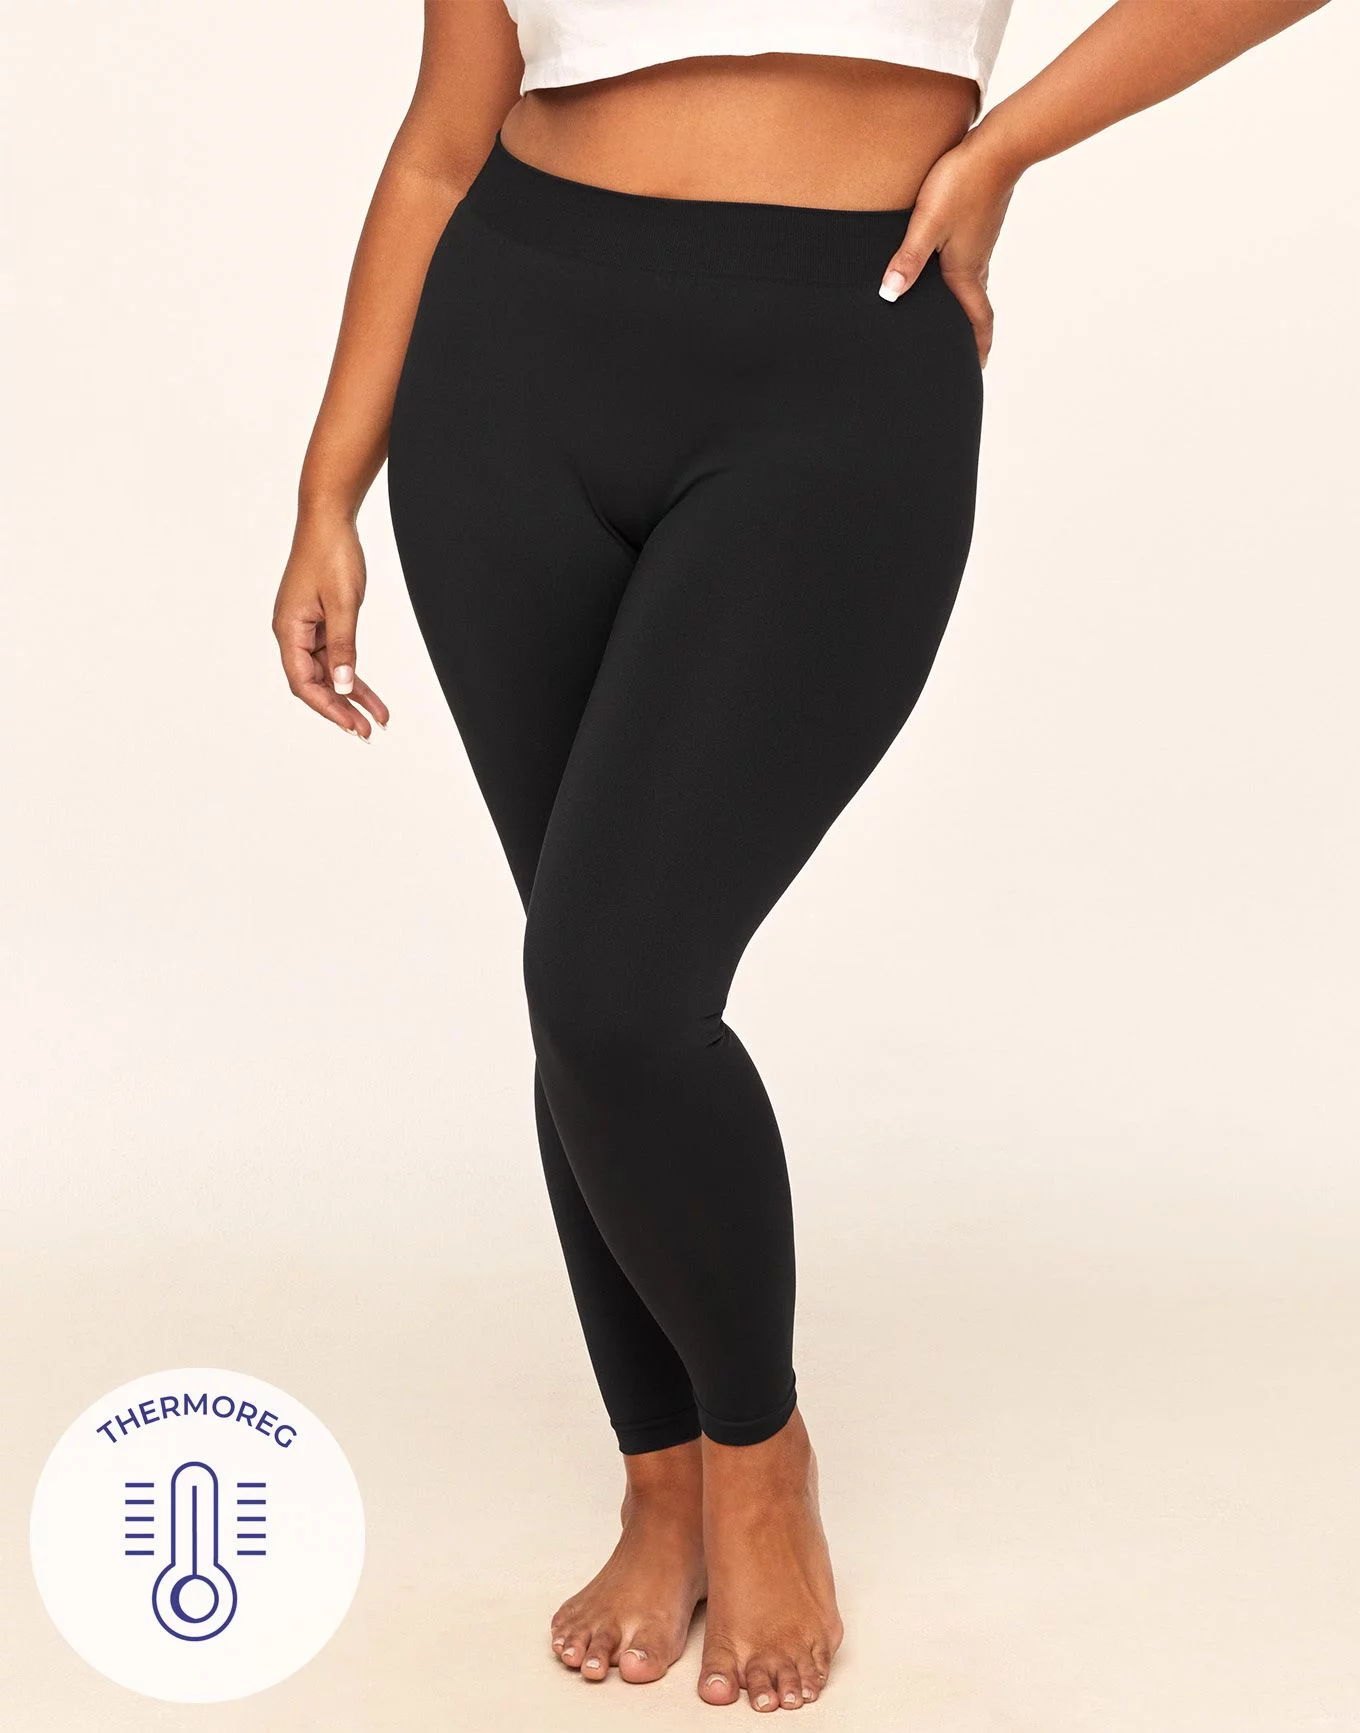 Plus Size Black High Waisted Shaping Footless Tights